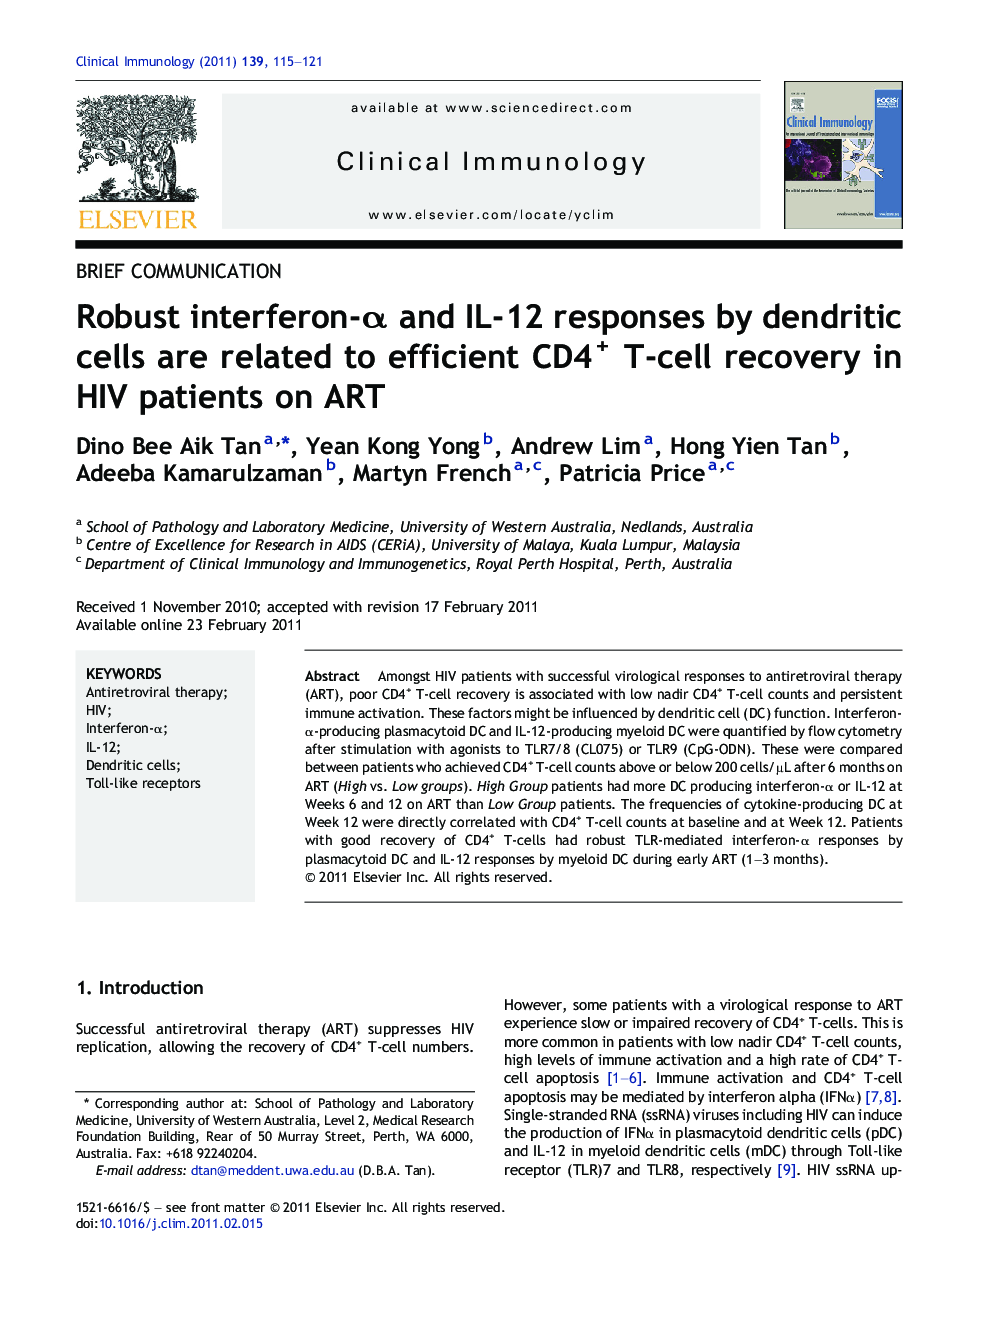 Robust interferon-Î± and IL-12 responses by dendritic cells are related to efficient CD4+ T-cell recovery in HIV patients on ART